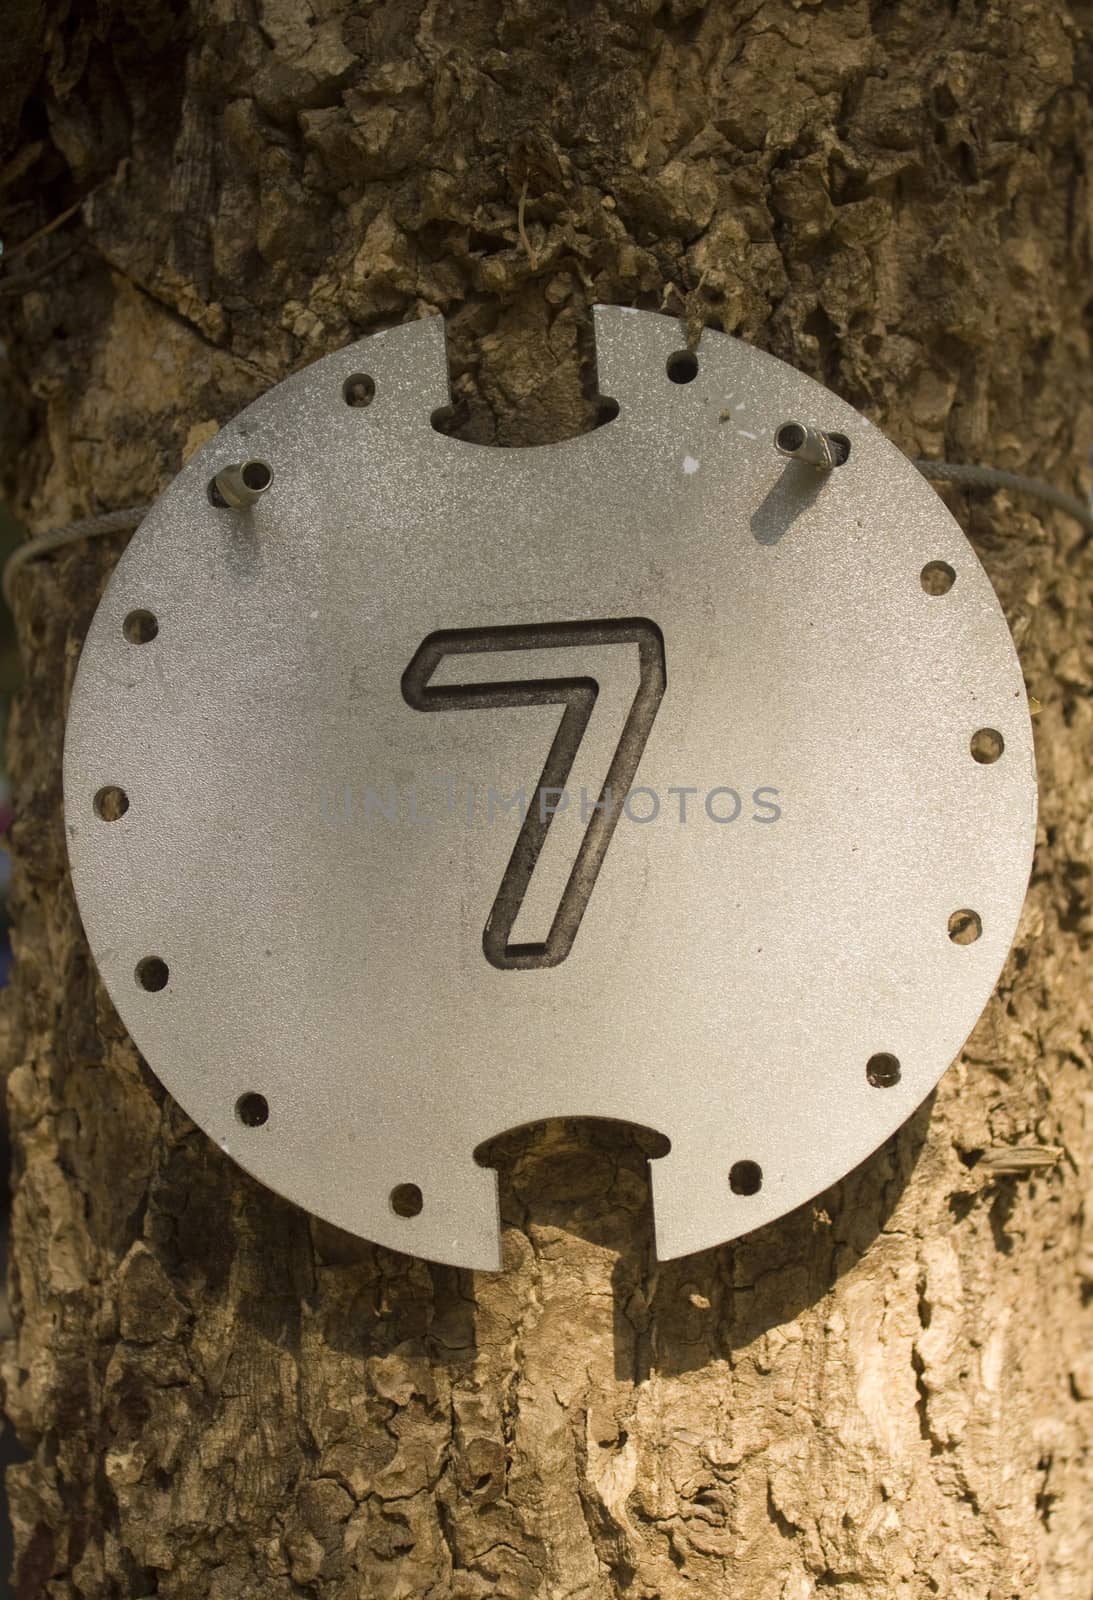 Plate number 7 on tree background